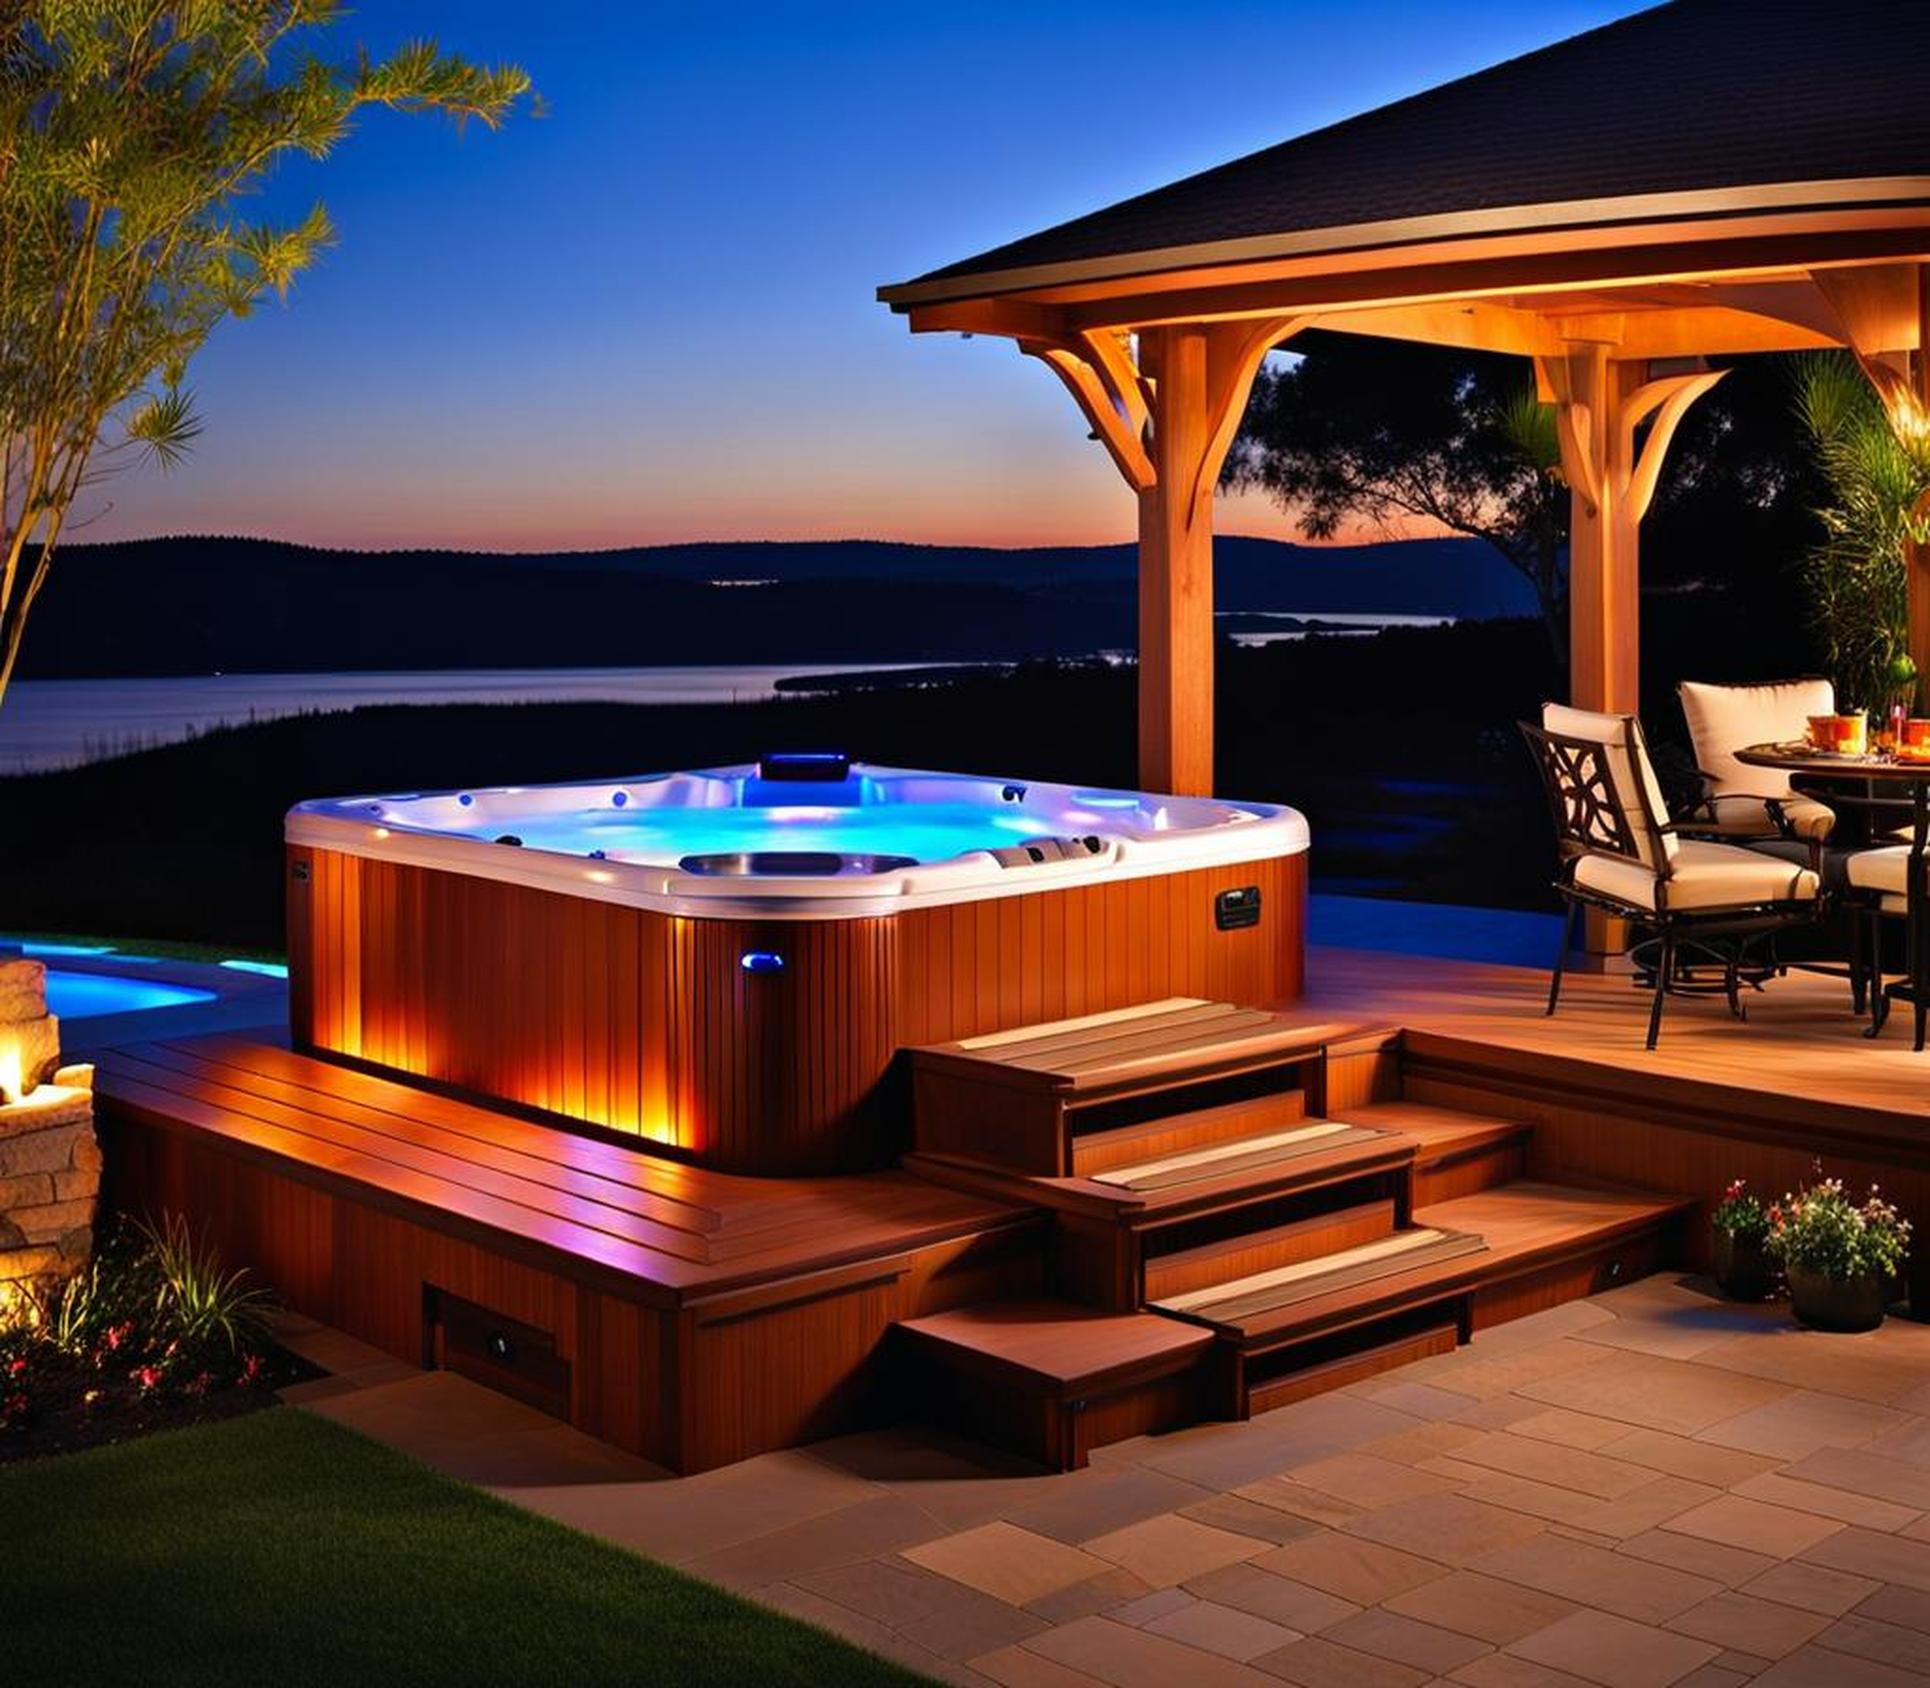 Above Ground Hot Tub Ideas to Relax and Unwind in Your Own Backyard Paradise